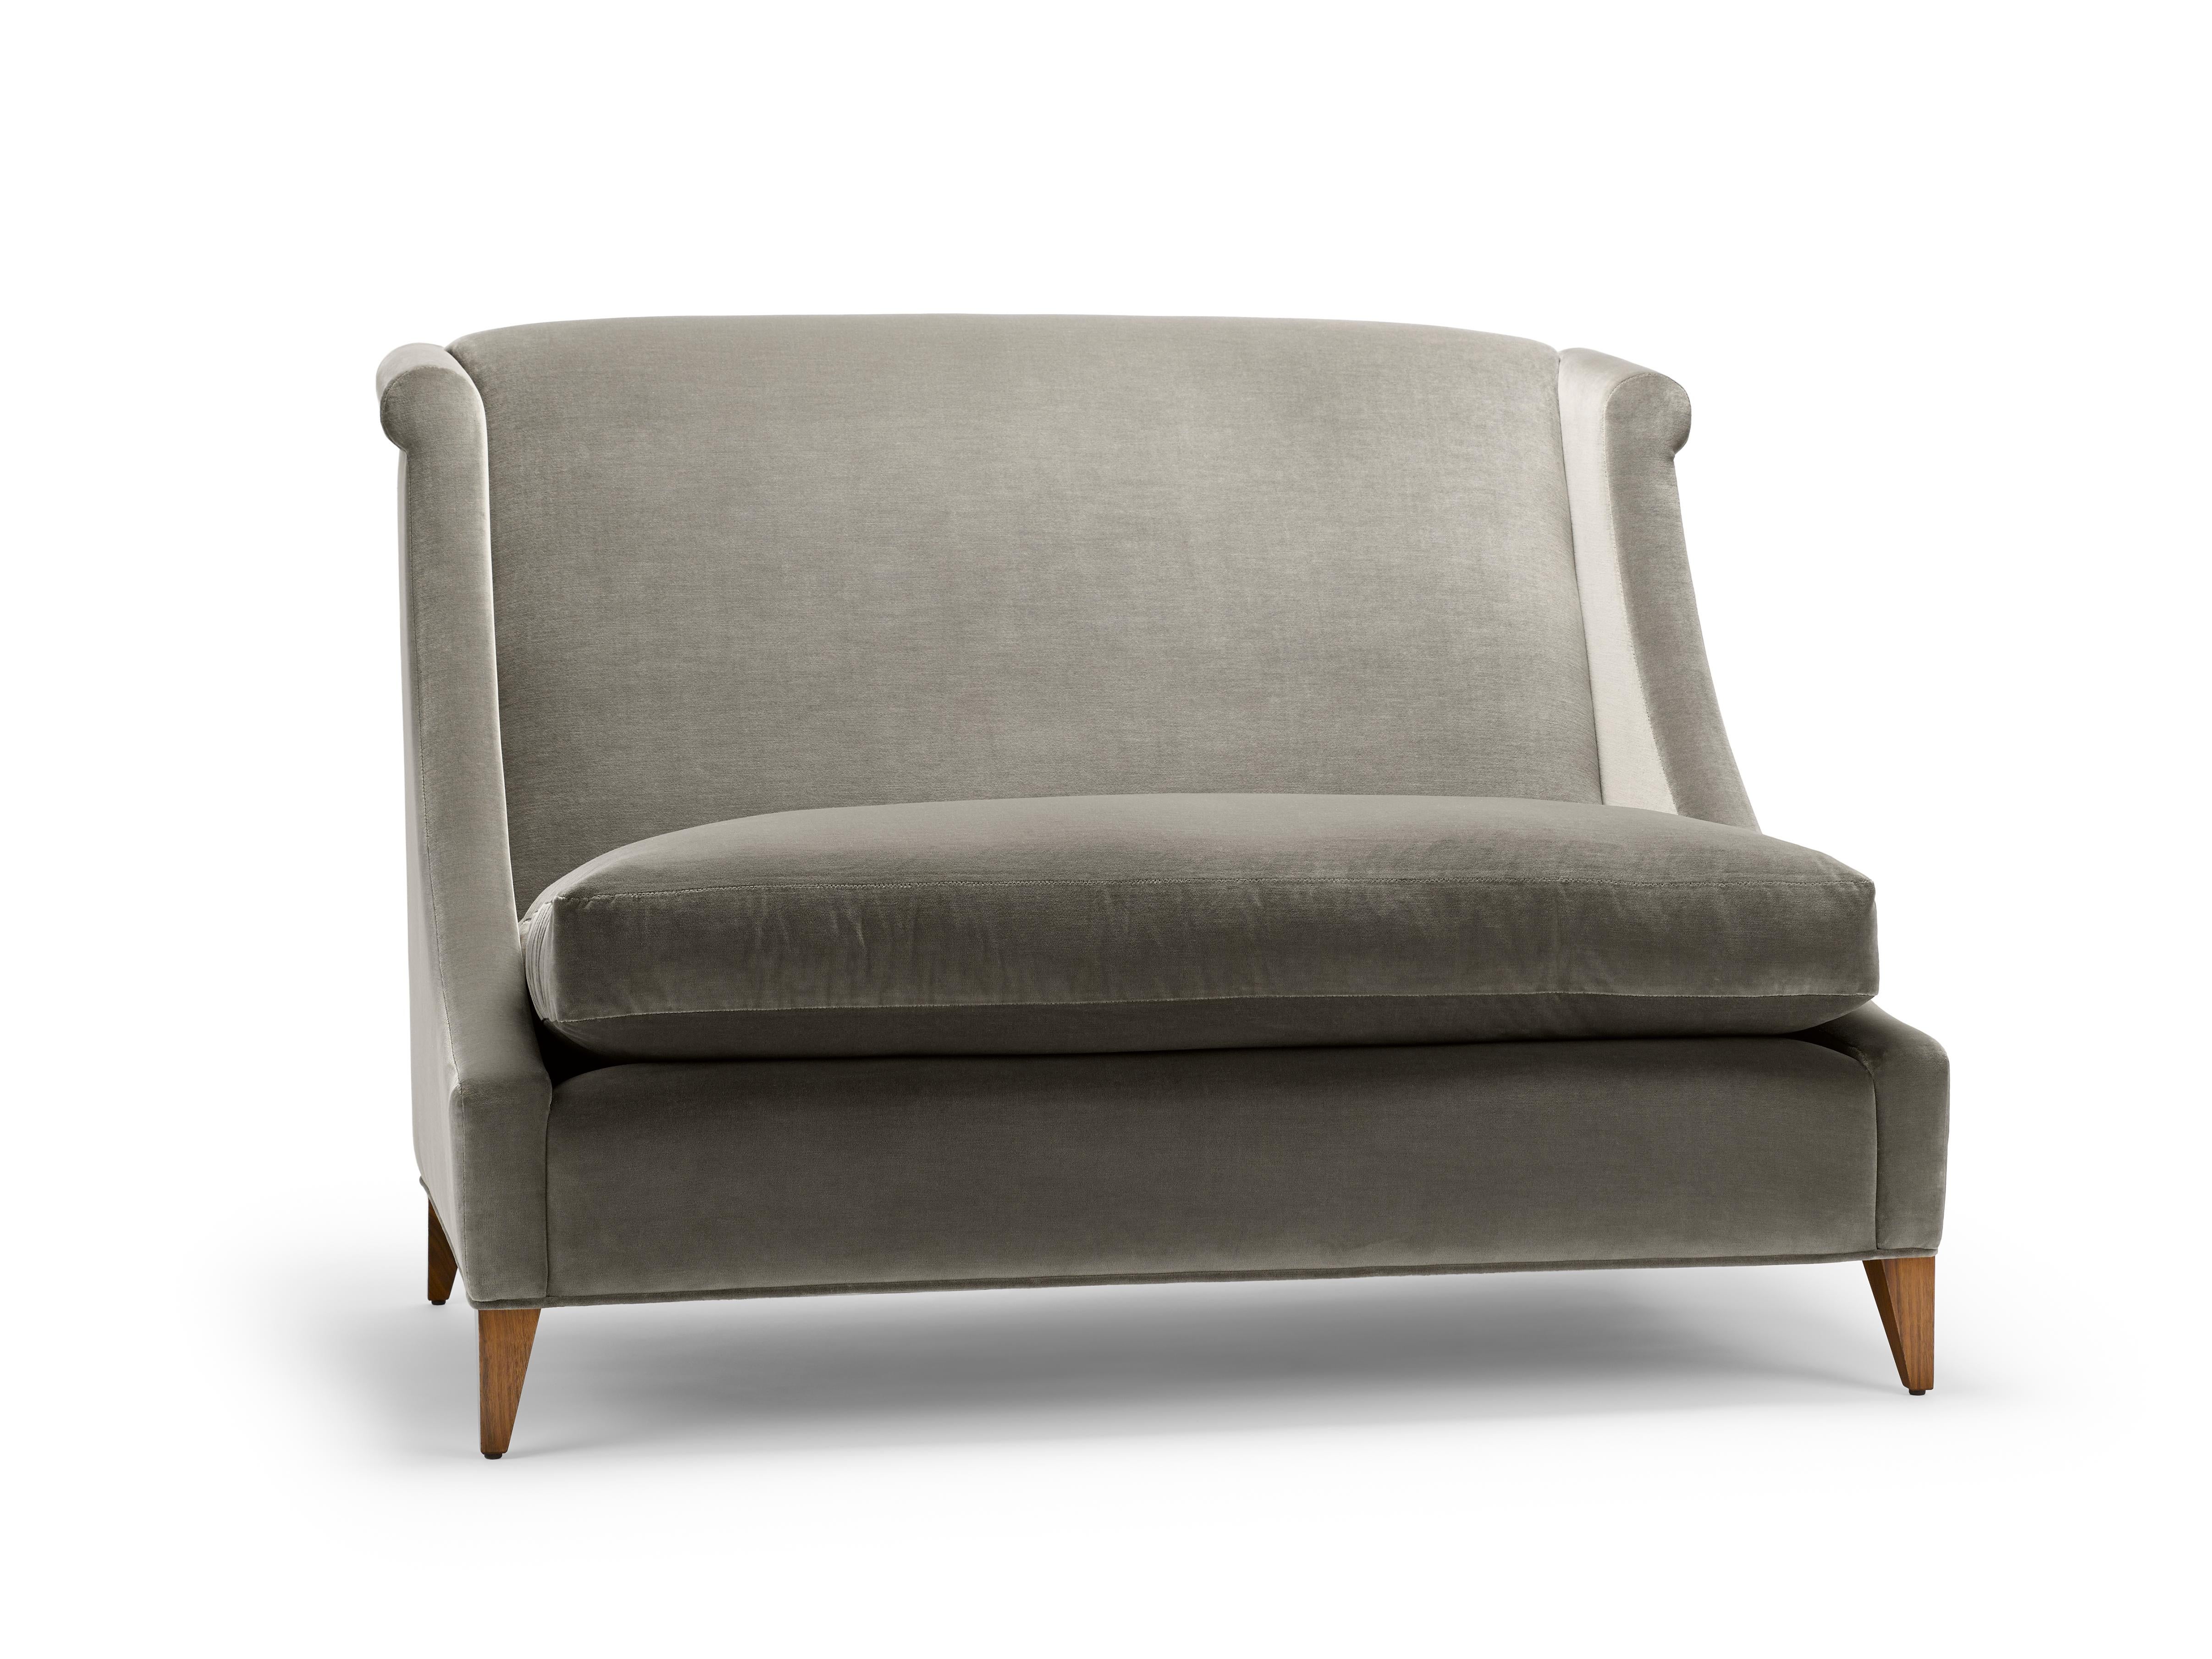 The Vegas Sofa, features a pronounced high back and sweeping curved arms. This special edition is upholstered in Mark Alexander Empire II velvet, colour Otter, with legs in natural oiled walnut. Empire is a luxurious velvet with a subtle horizontal